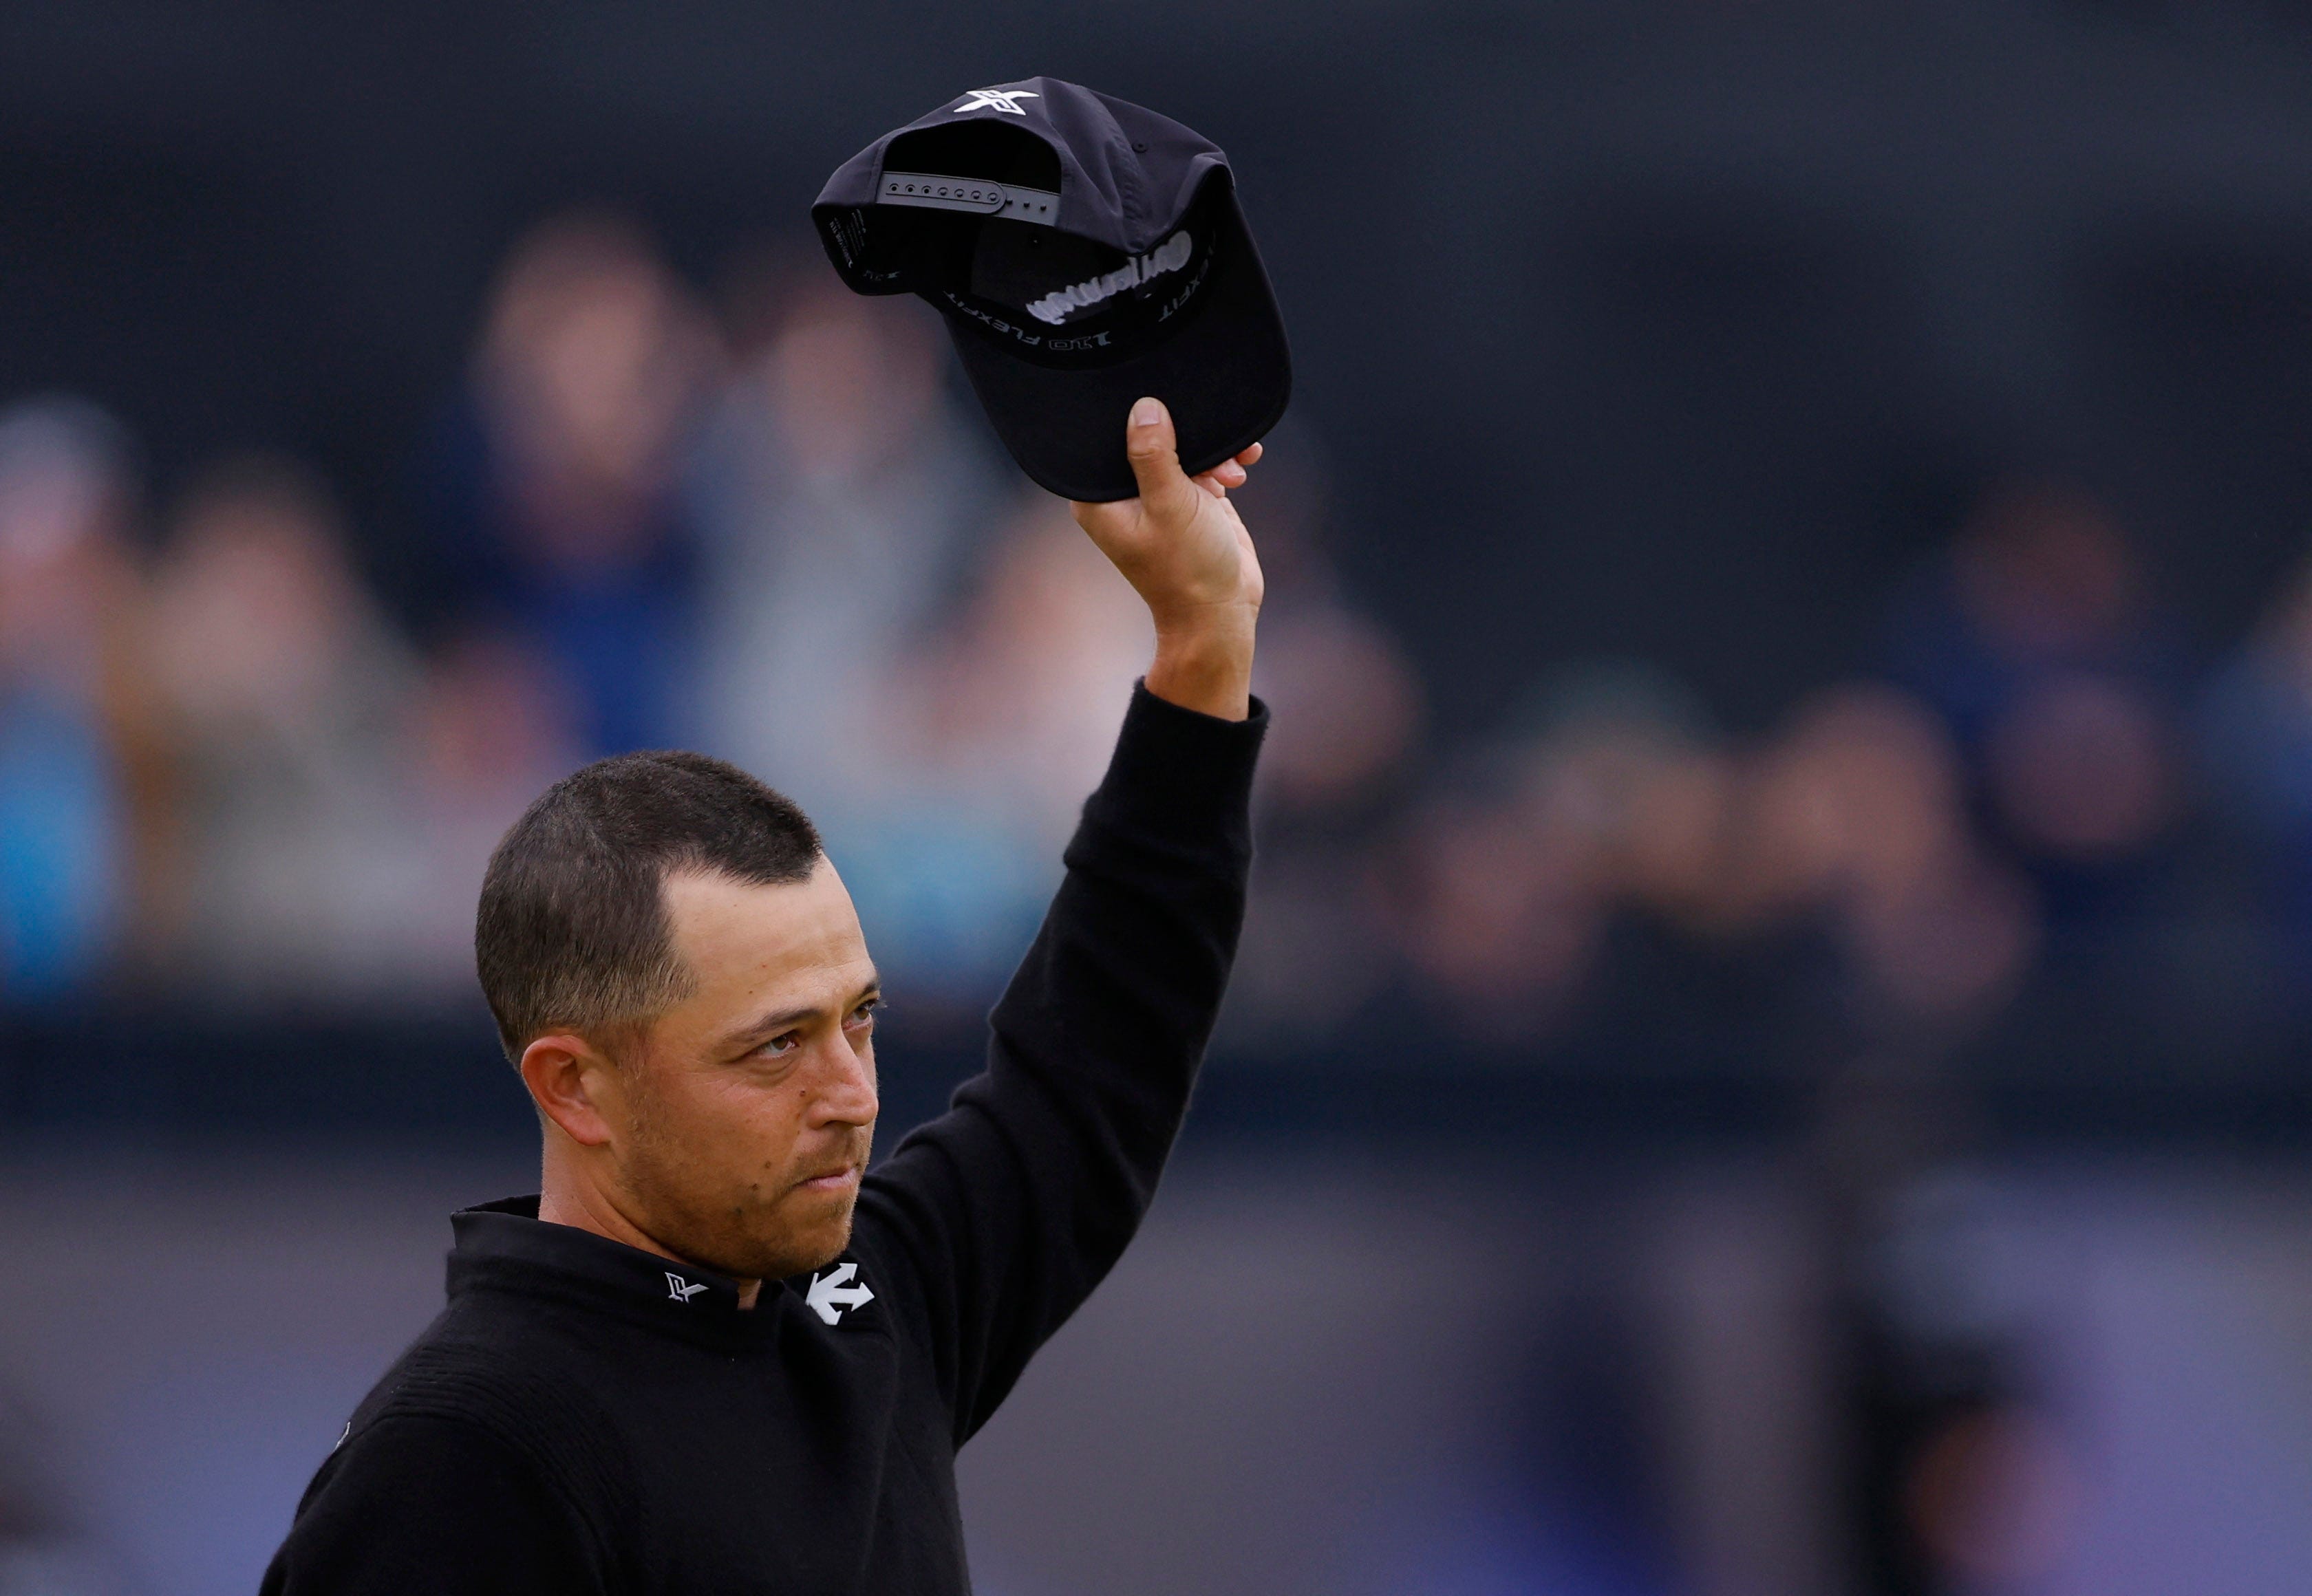 Xander Schauffele claims British Open title for his second major of season